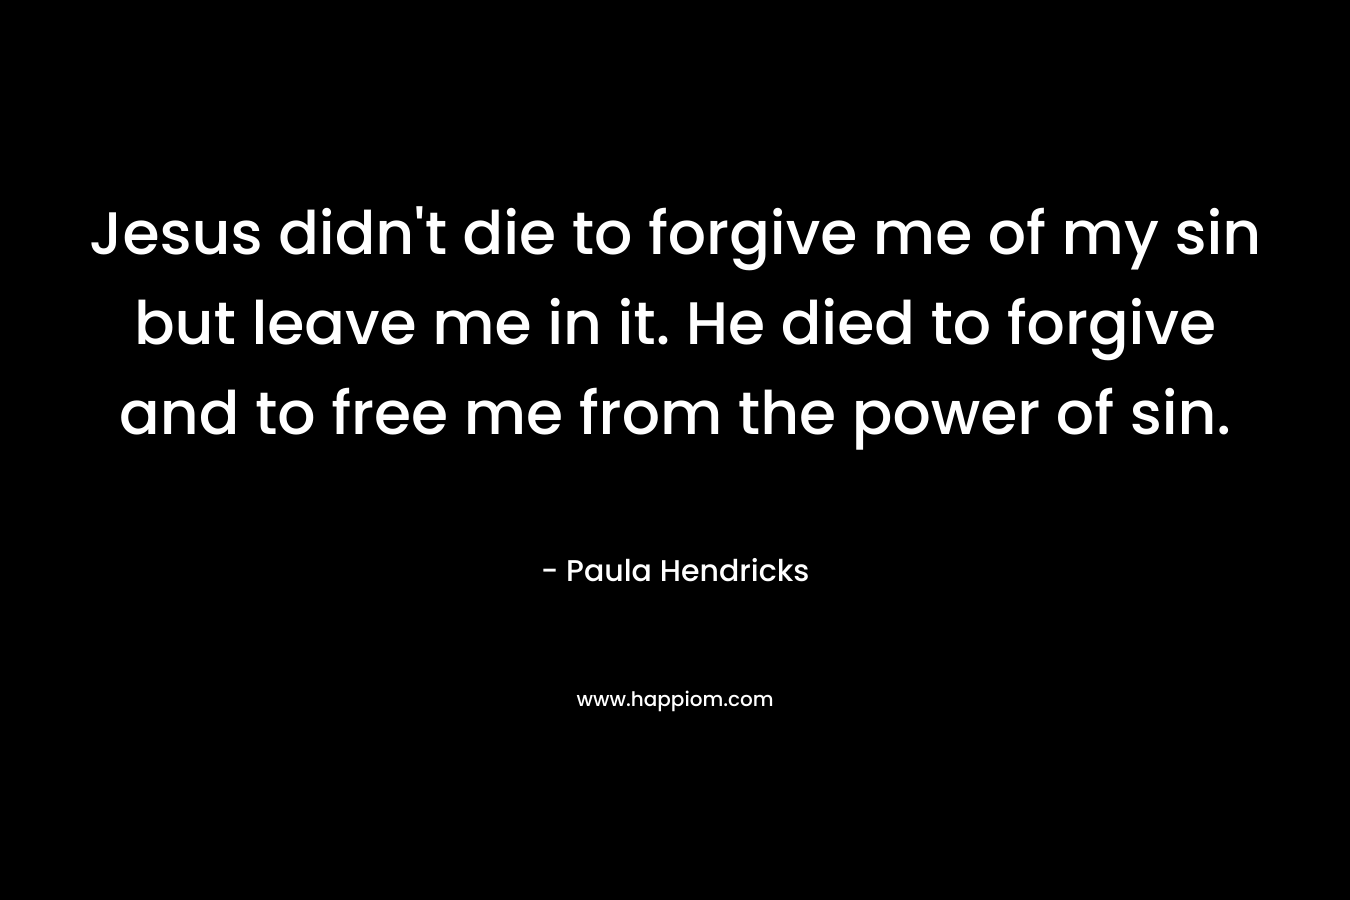 Jesus didn’t die to forgive me of my sin but leave me in it. He died to forgive and to free me from the power of sin. – Paula Hendricks